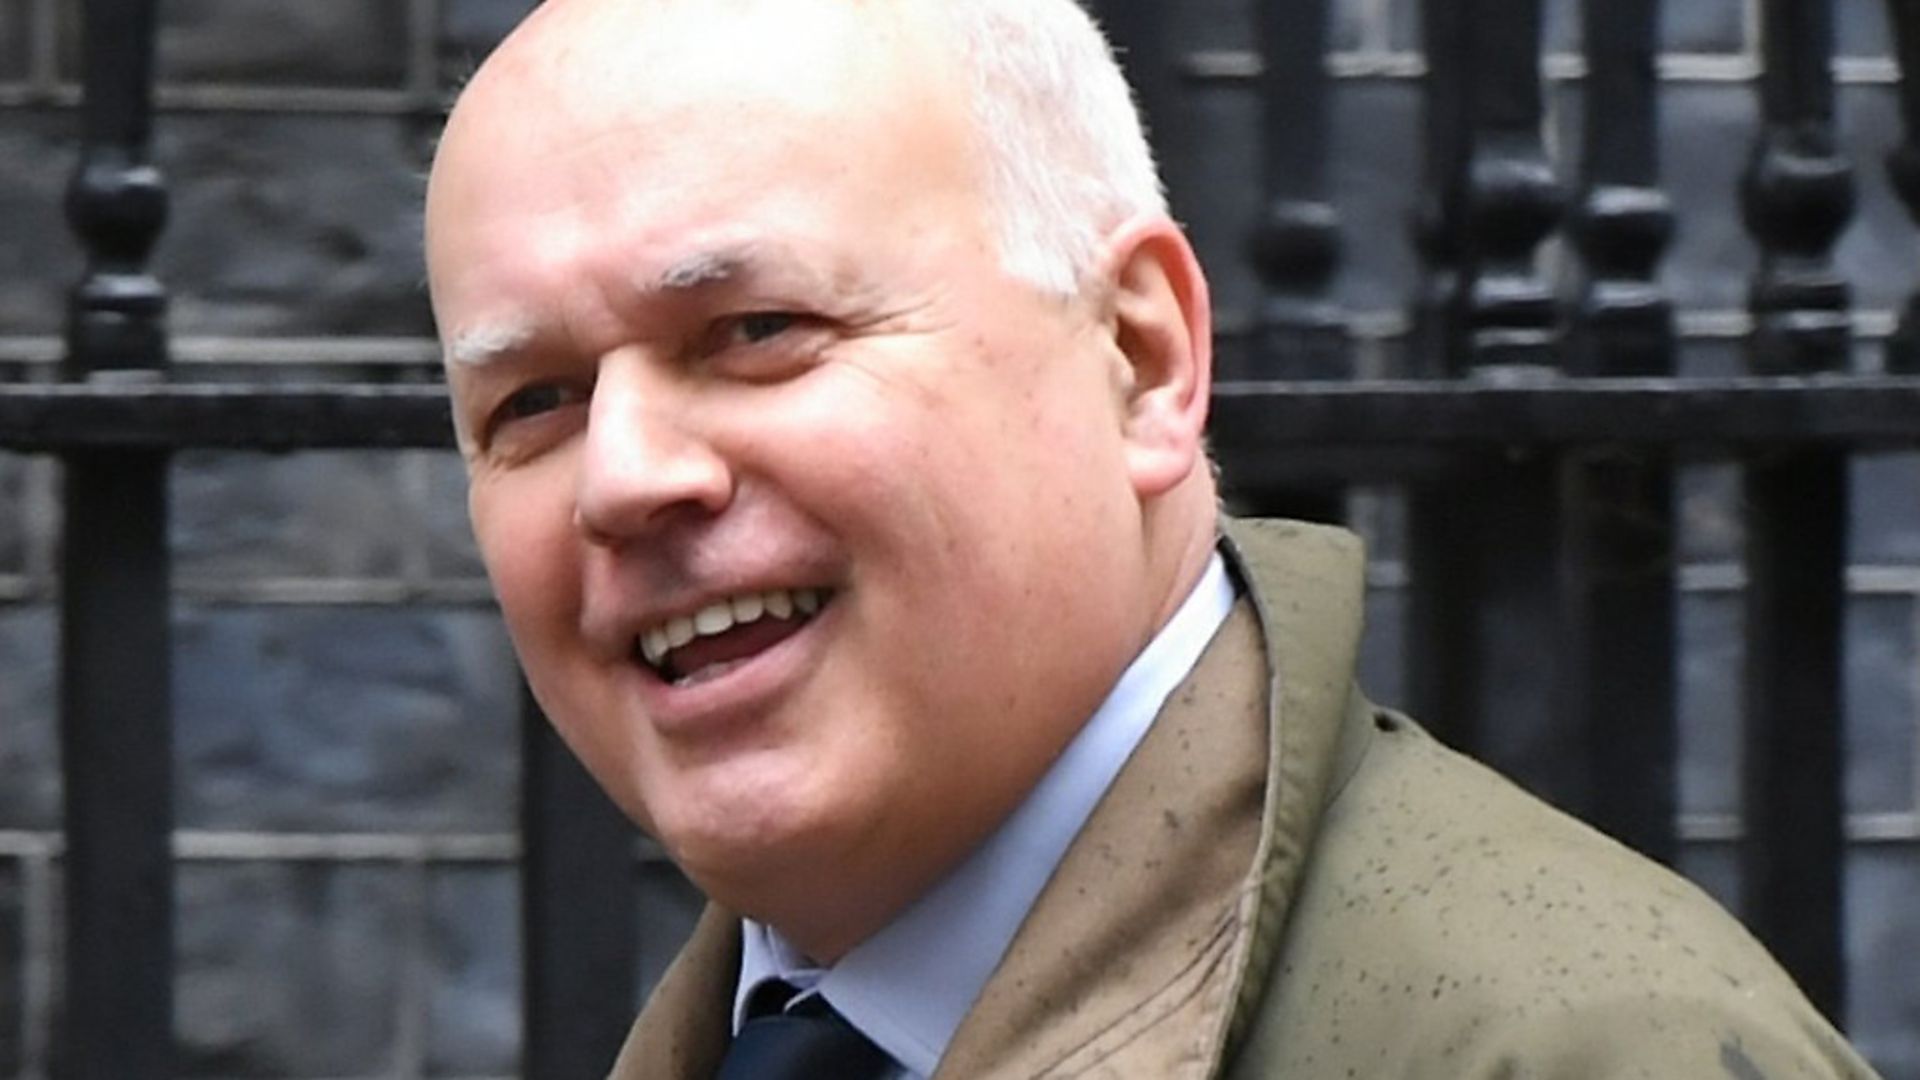 MP Iain Duncan Smith. Picture: PA Images/Stefan Rousseau. - Credit: PA Wire/PA Images